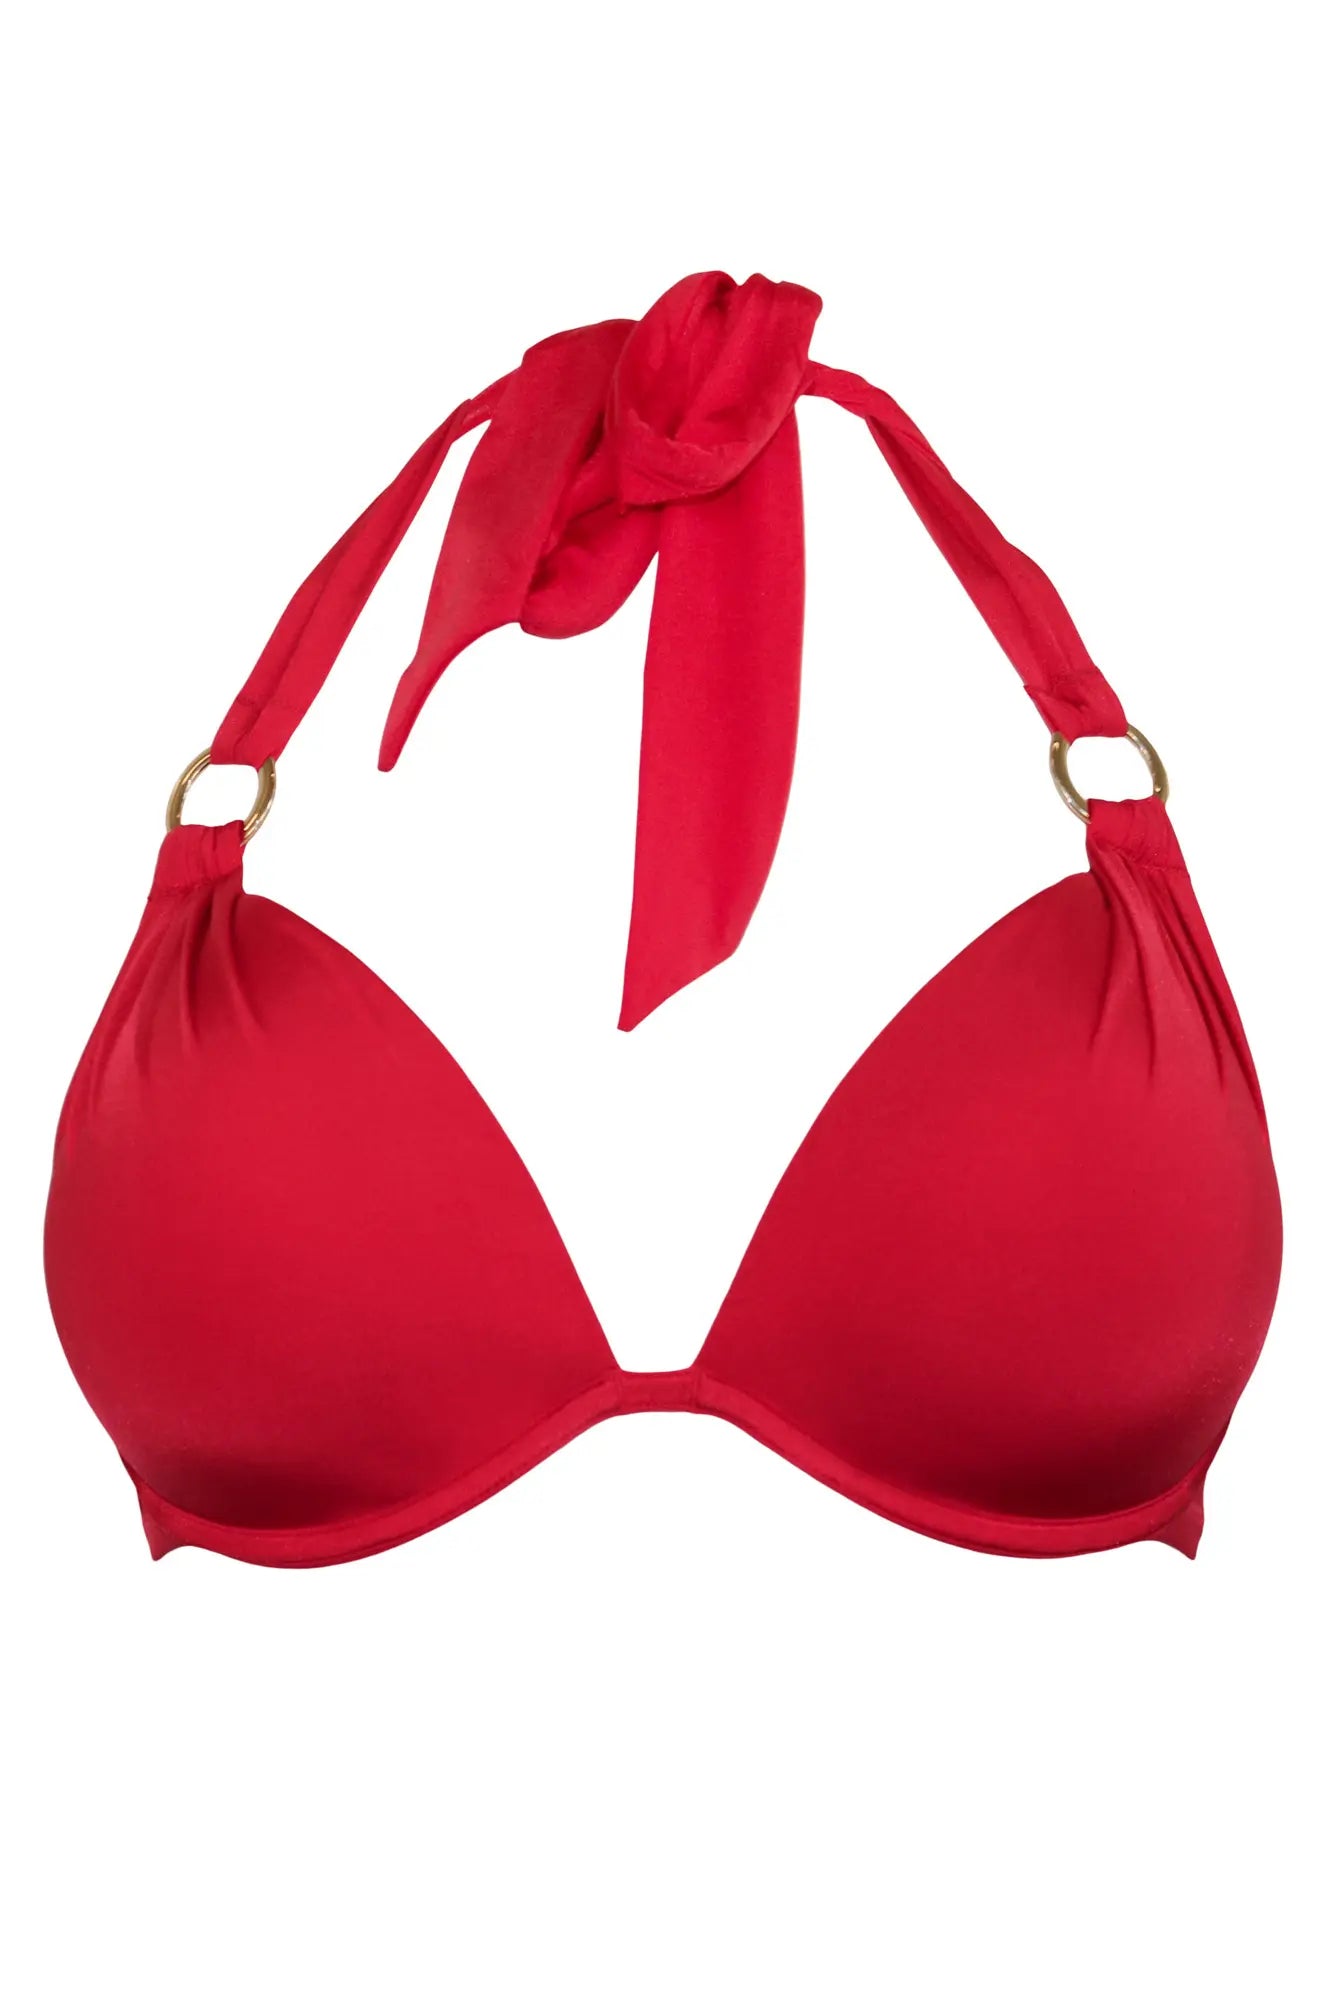 Prime Prime Extra Long Matches Strong Support Bra Work Out Sets Women  Primark Bras Online Red Crop Tops Wmbra Posture : : Fashion